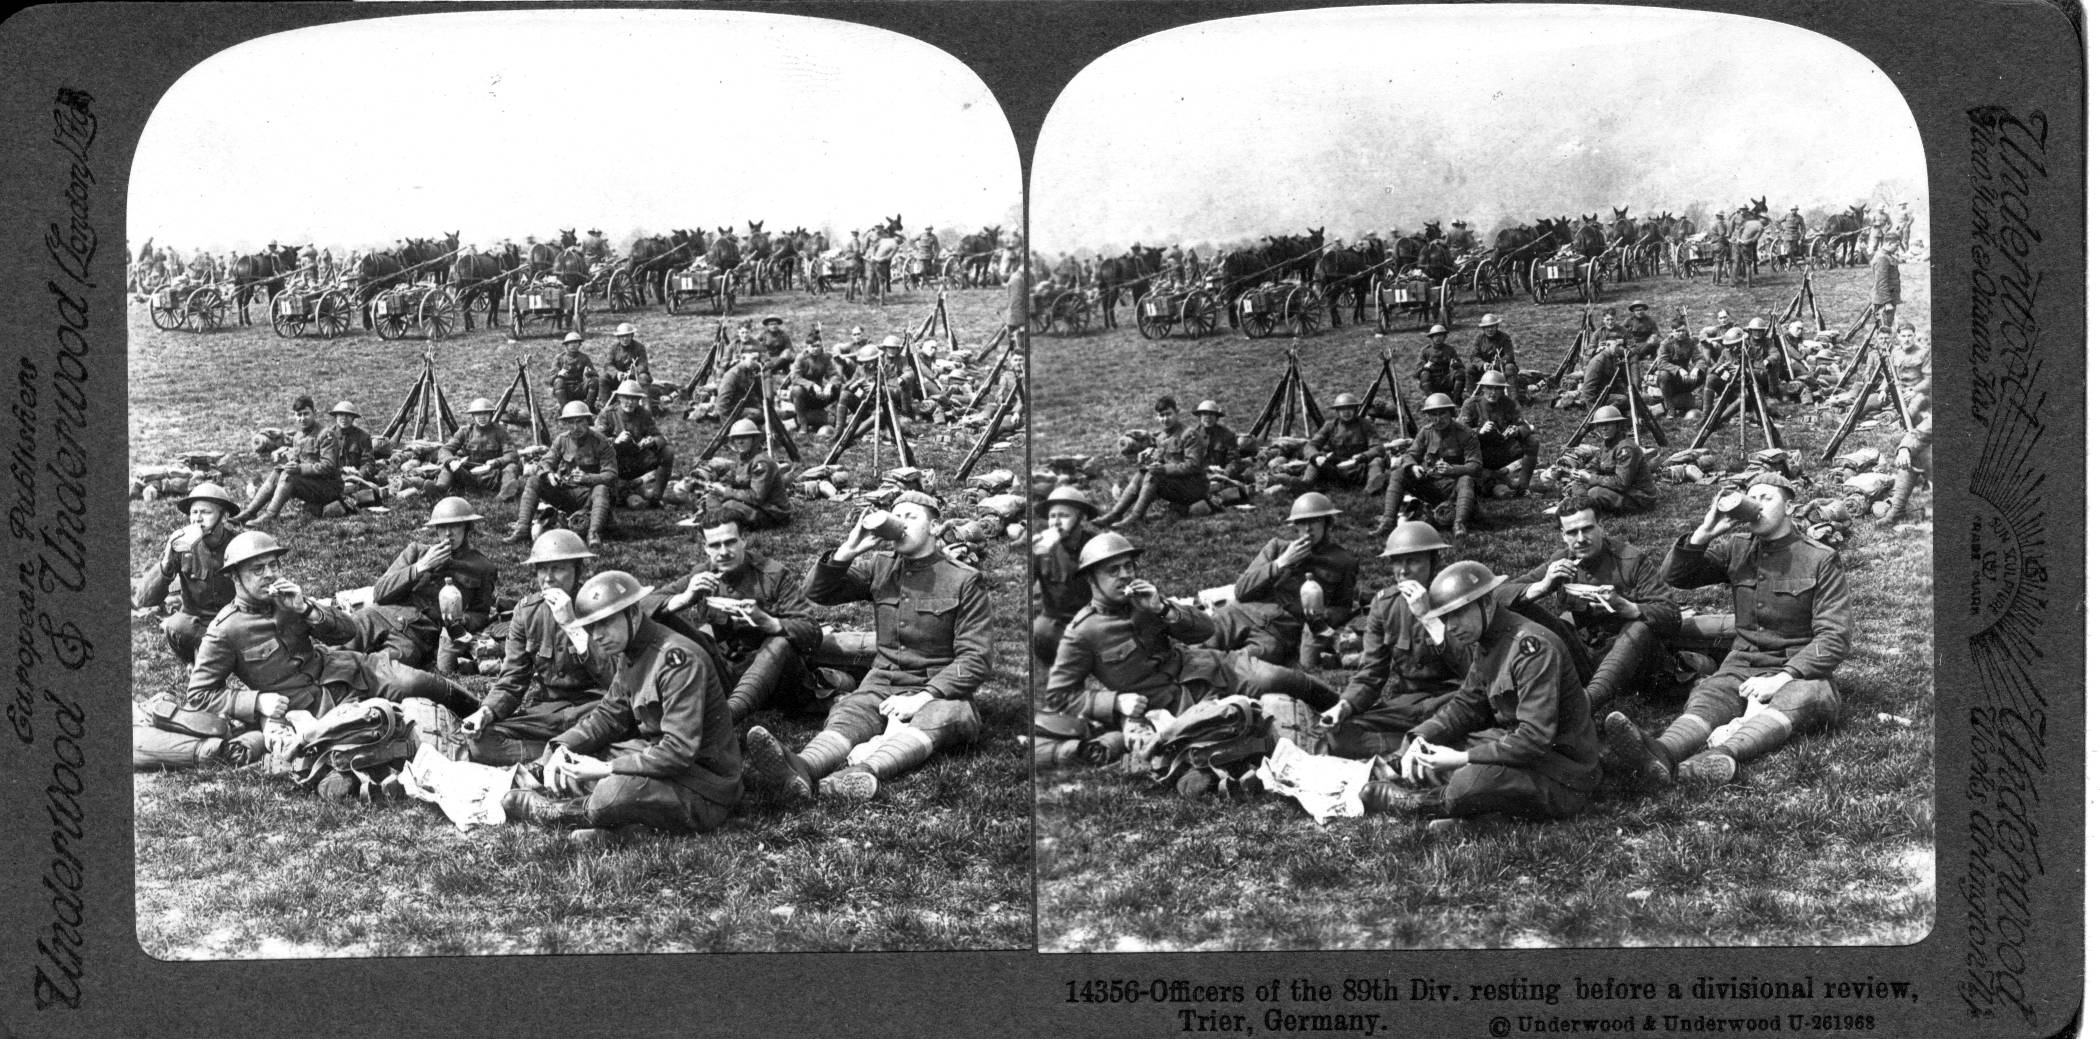 Officers of the 89th Div. resting before a divisional review, Trier, Germany